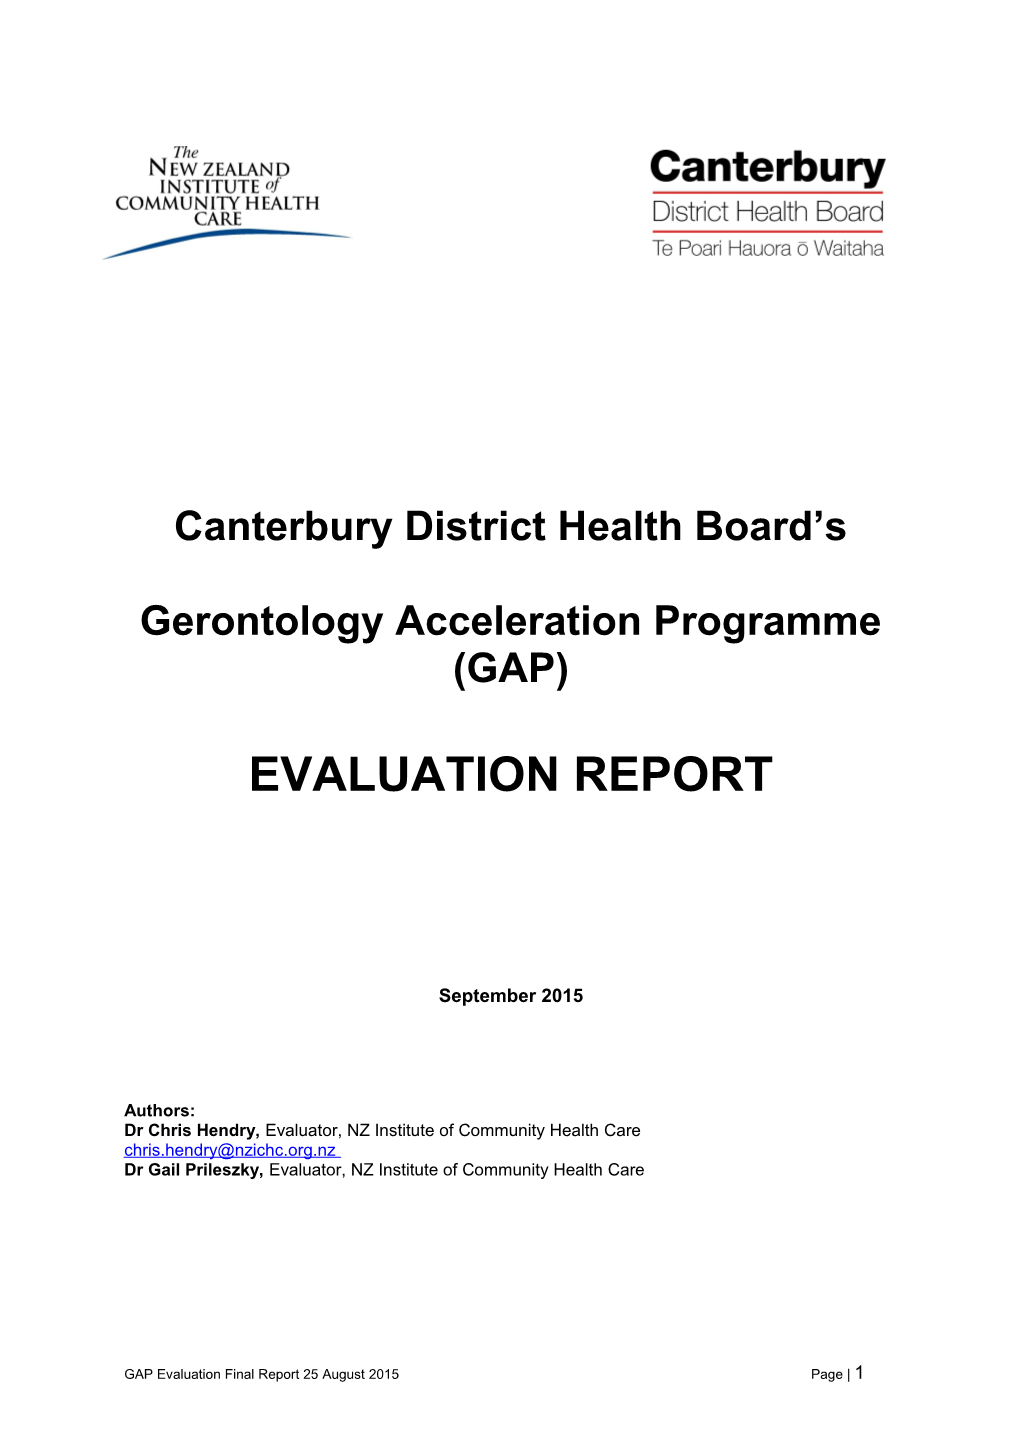 Canterbury District Health Board S Gerontology Acceleration Programme (GAP) Evaluation Report